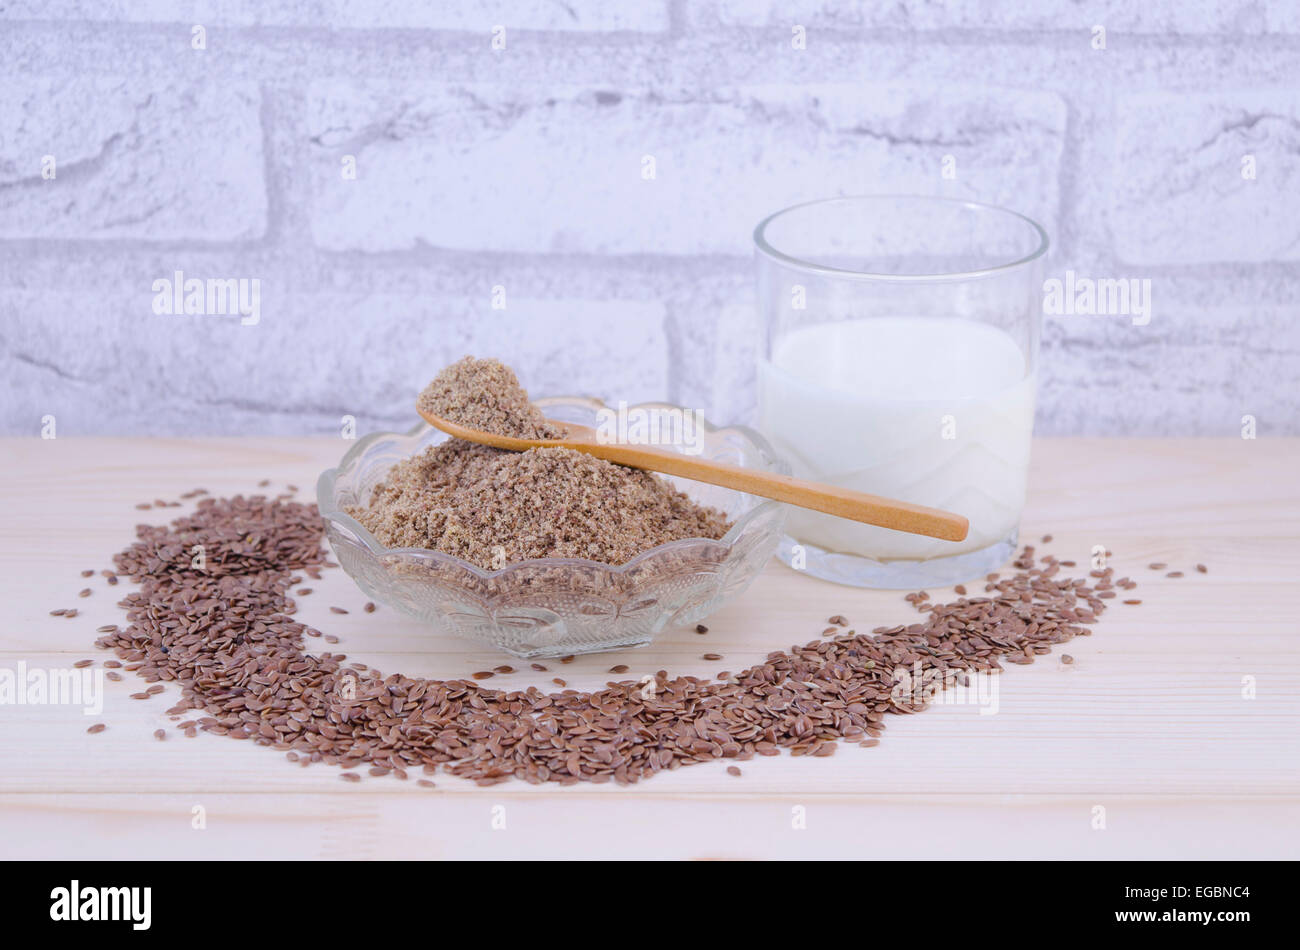 Glass of yogurt and flax seeds, whole and grounded on a wooden table Stock Photo